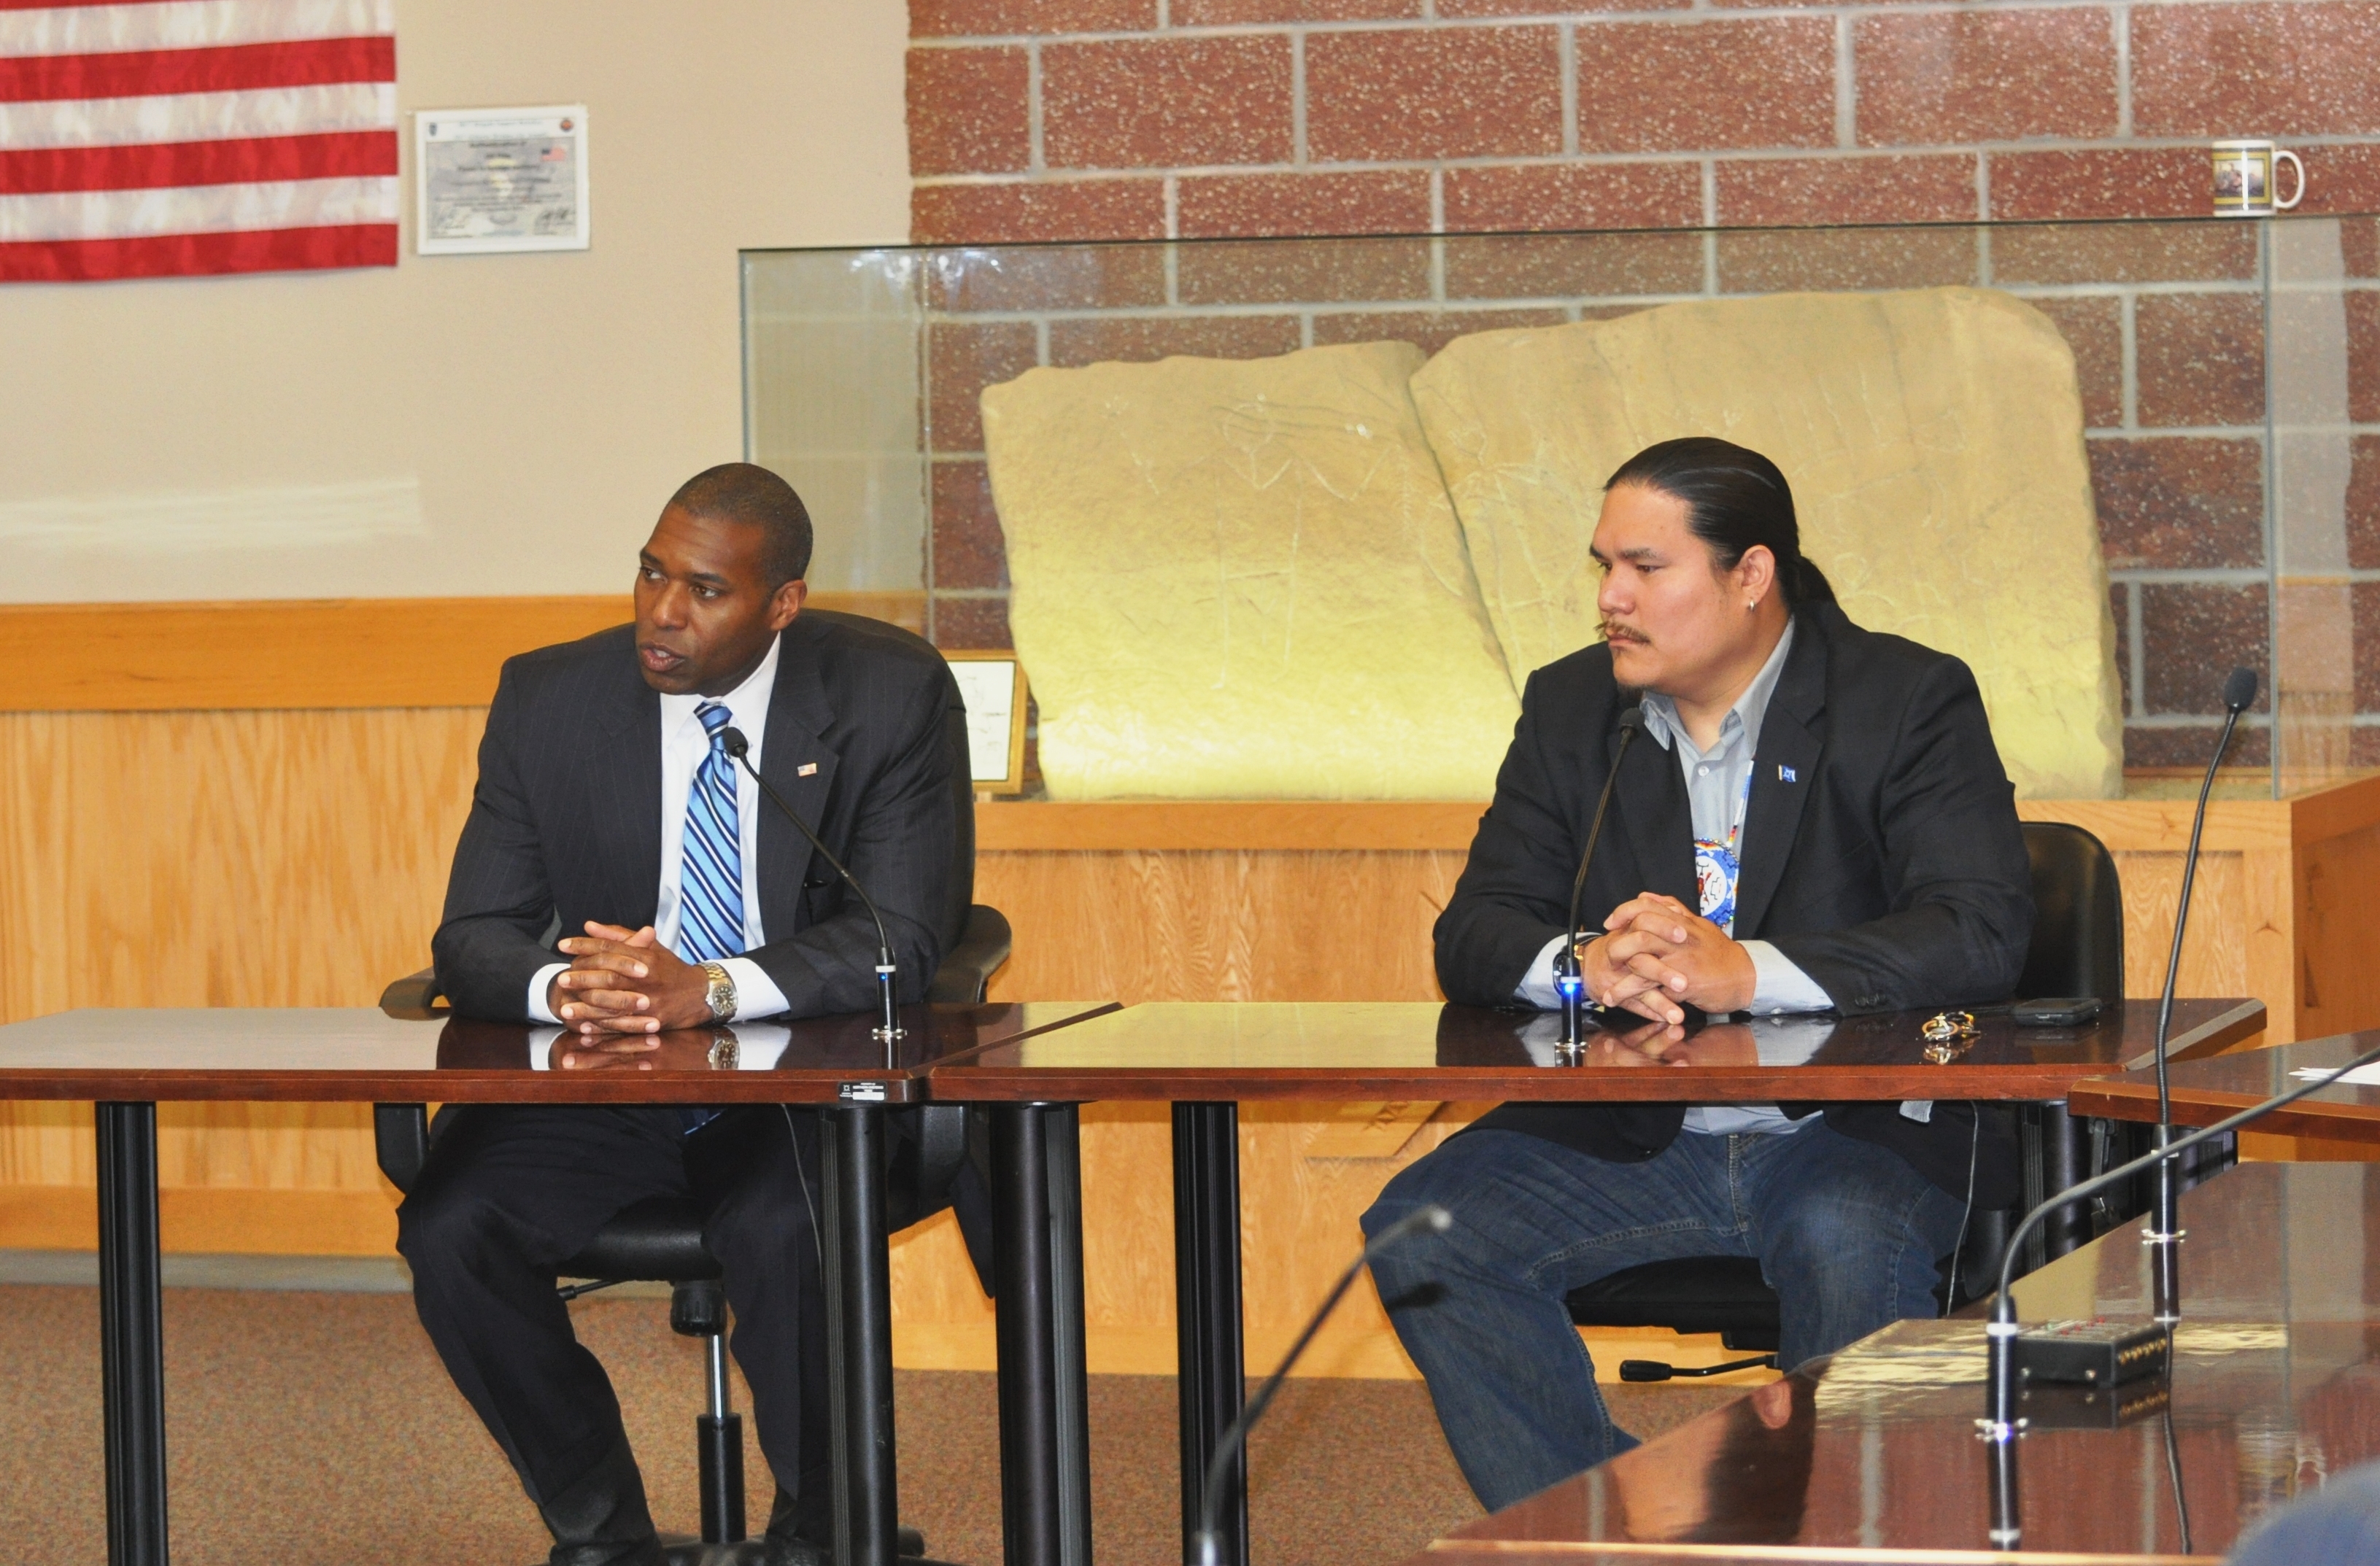 AAG (A) West and Northern Cheyenne Council Representative Killsback during a meeting.